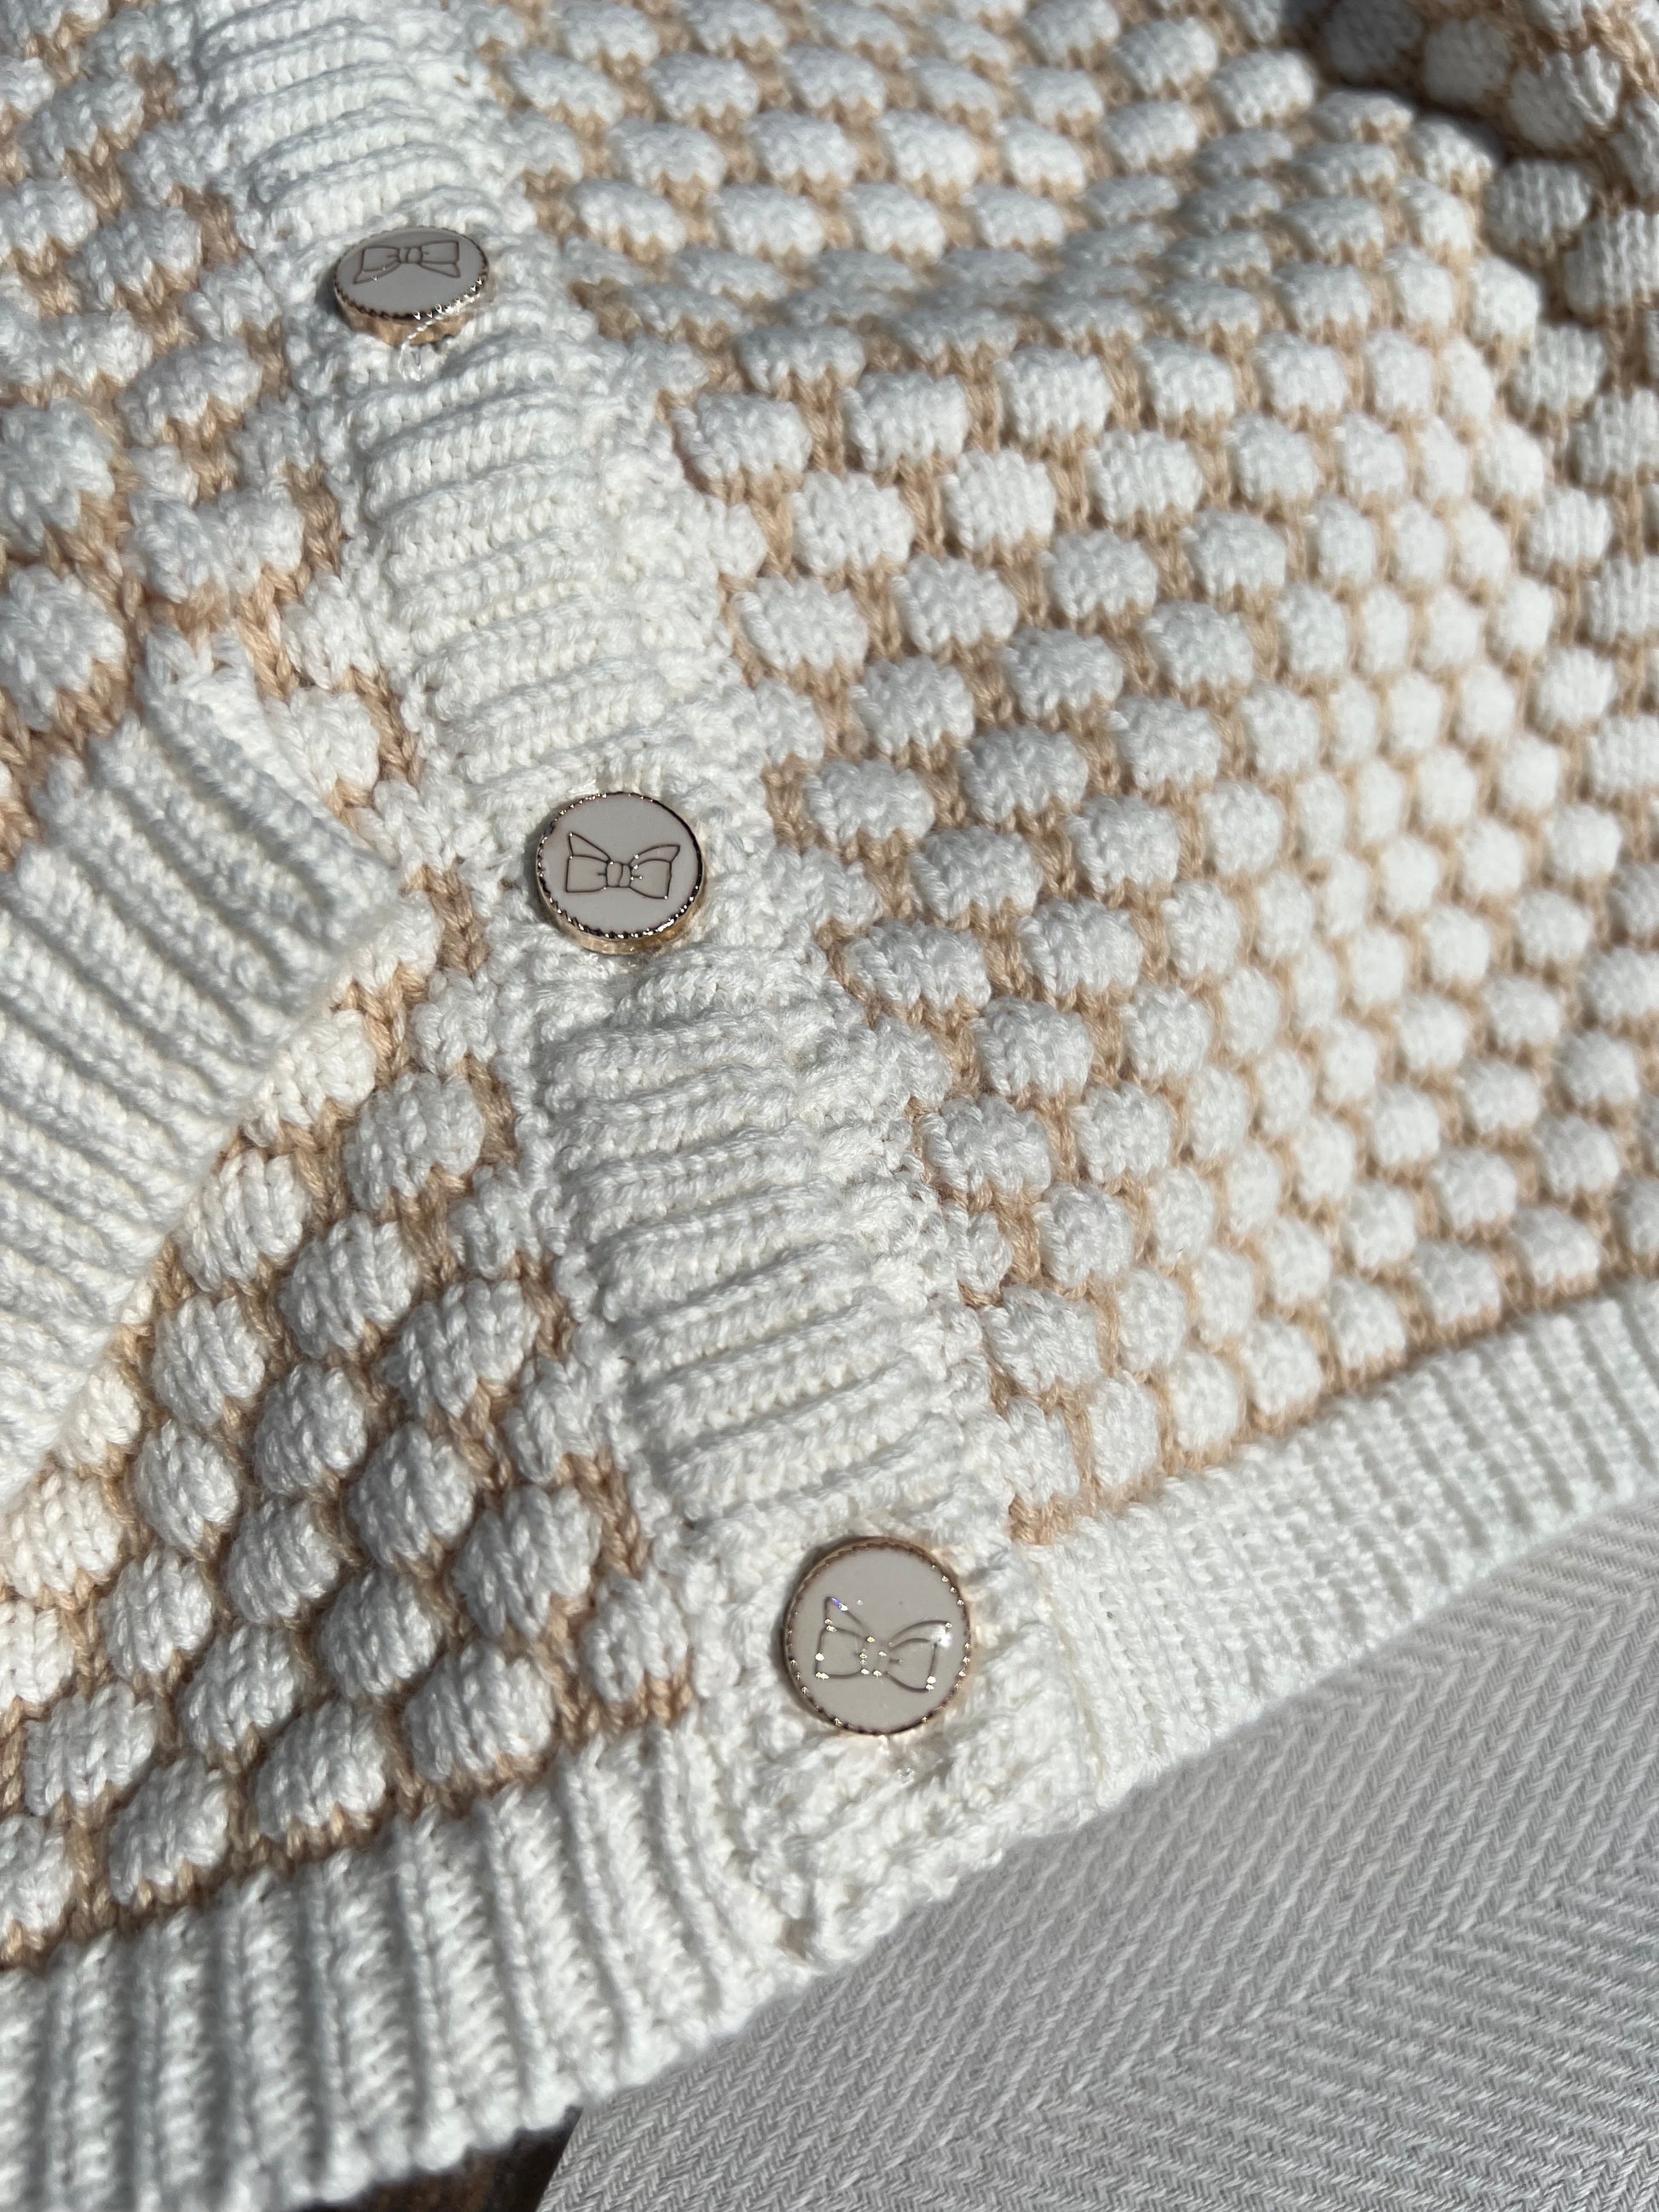 Honeycomb Pattern Knitted Baby Button-up Cardigan, Buttons are White with Gold Printed Bows and a Gold Rim